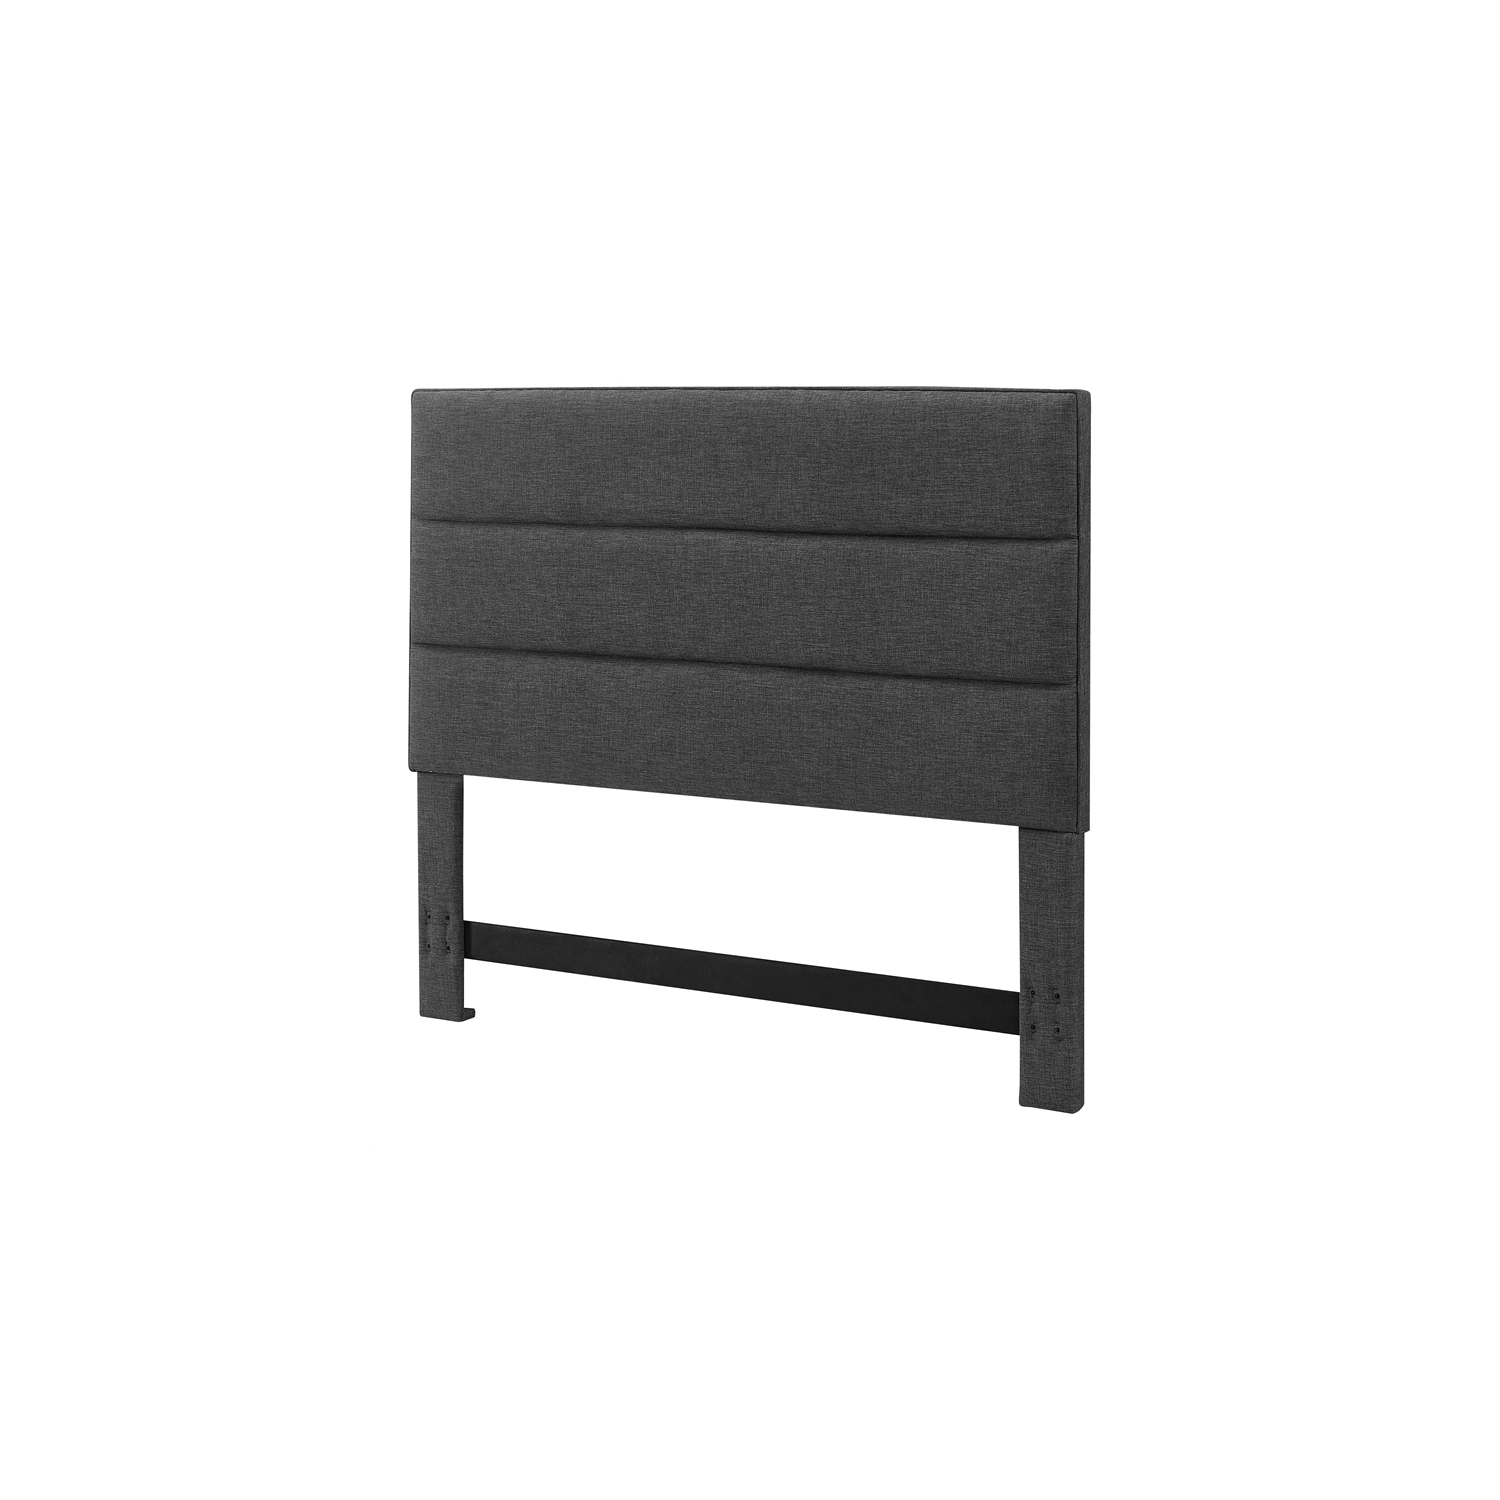 Serta Palisades Queen Upholstered Headboard in Charcoal Gray